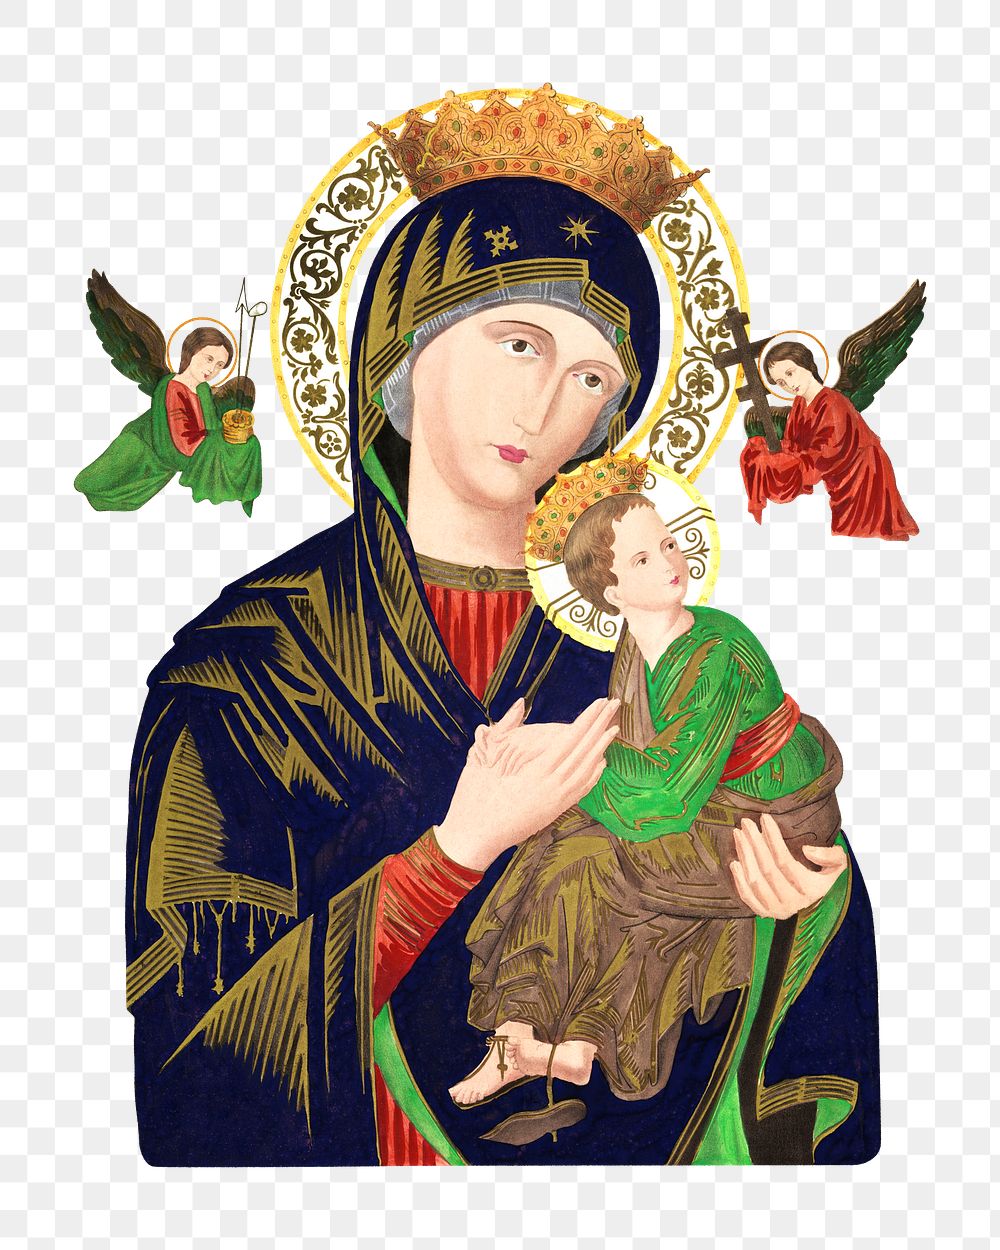 Png S. Maria de Perpetuo Succursu, Our Lady of Perpetual Help on transparent background.   Remastered by rawpixel